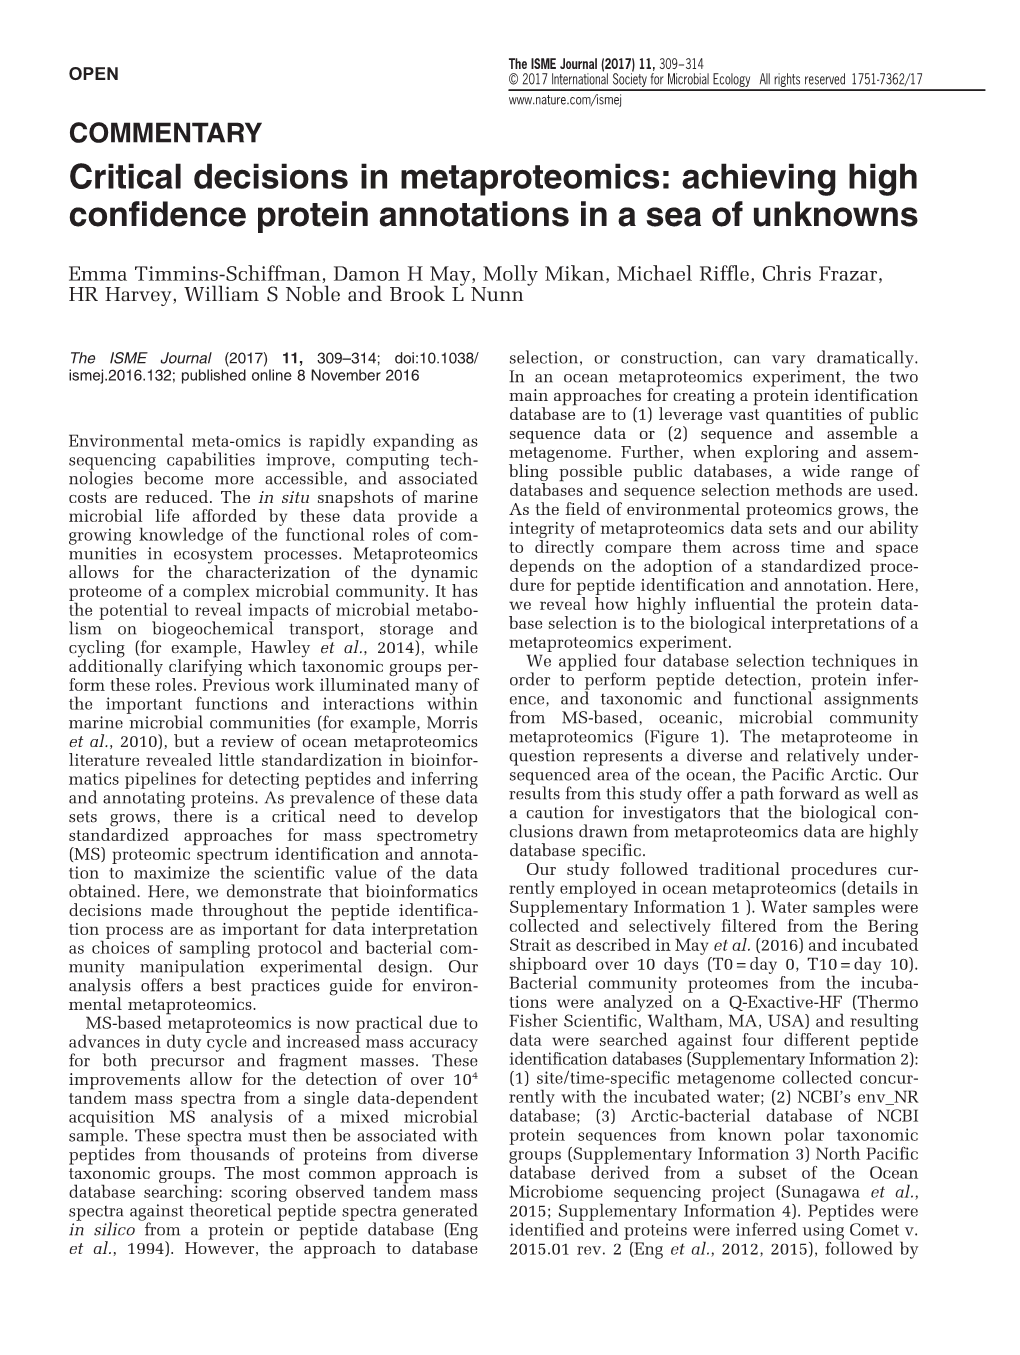 Critical Decisions in Metaproteomics: Achieving High Confidence Protein Annotations in a Sea of Unknowns